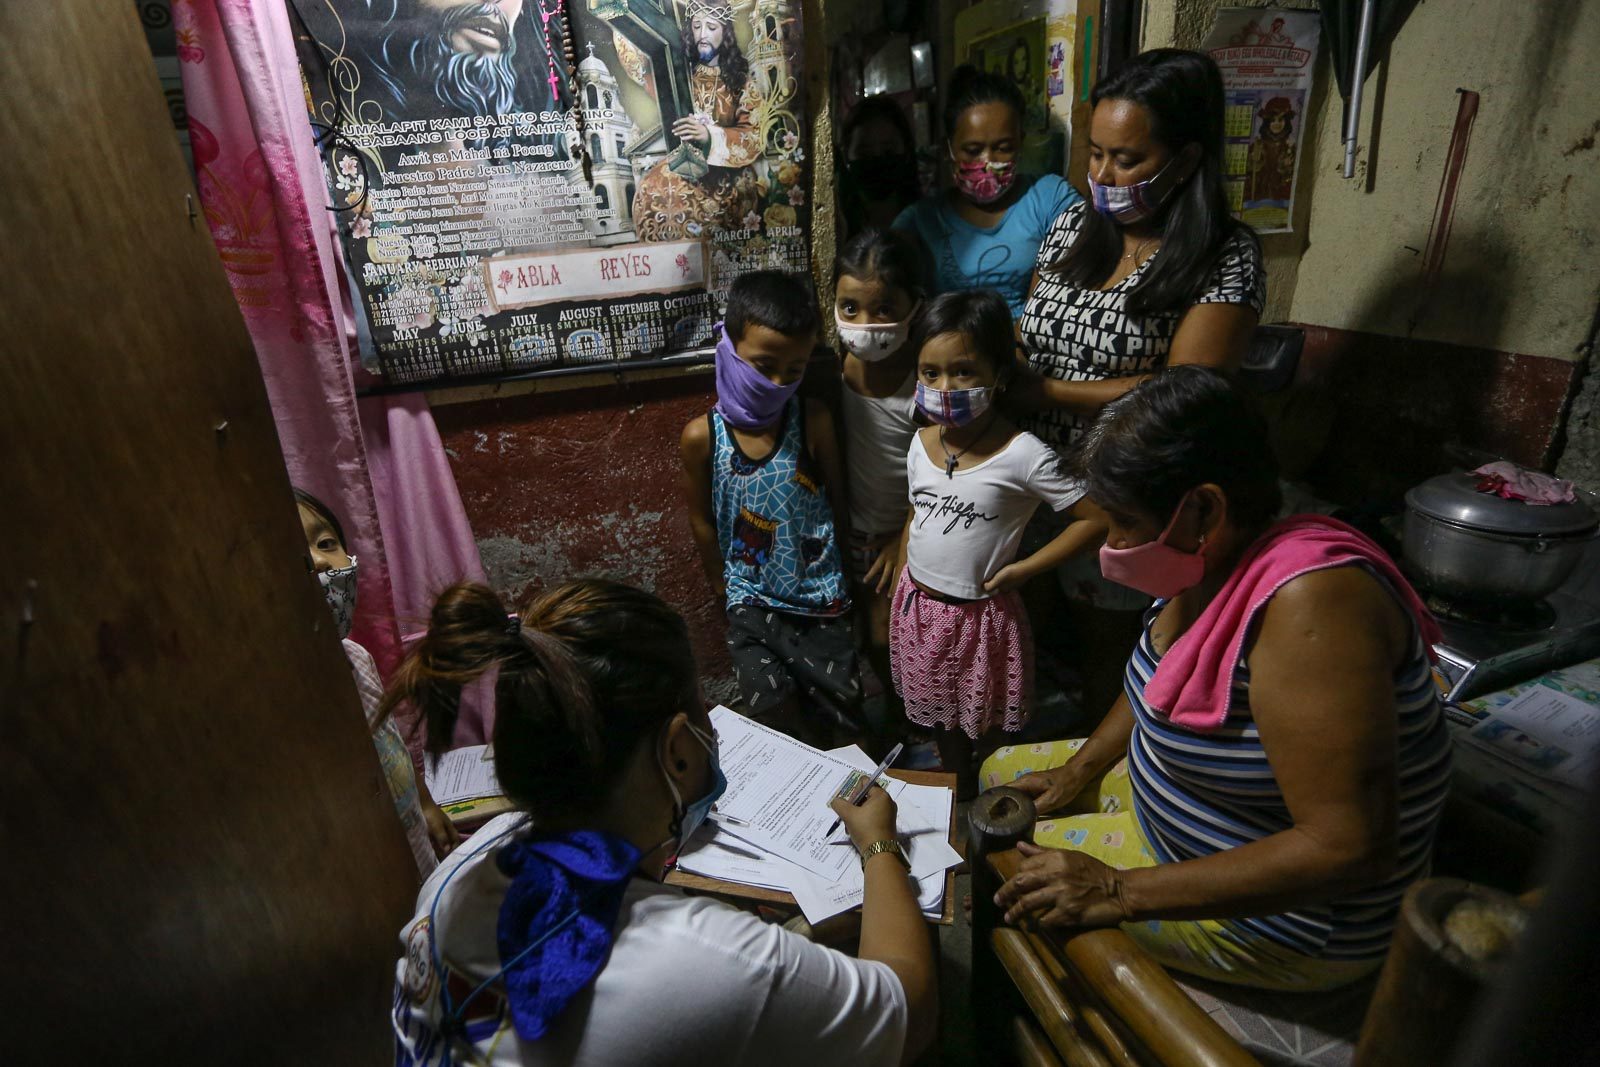 As Filipinos struggle to pay bills, fraudsters target them too